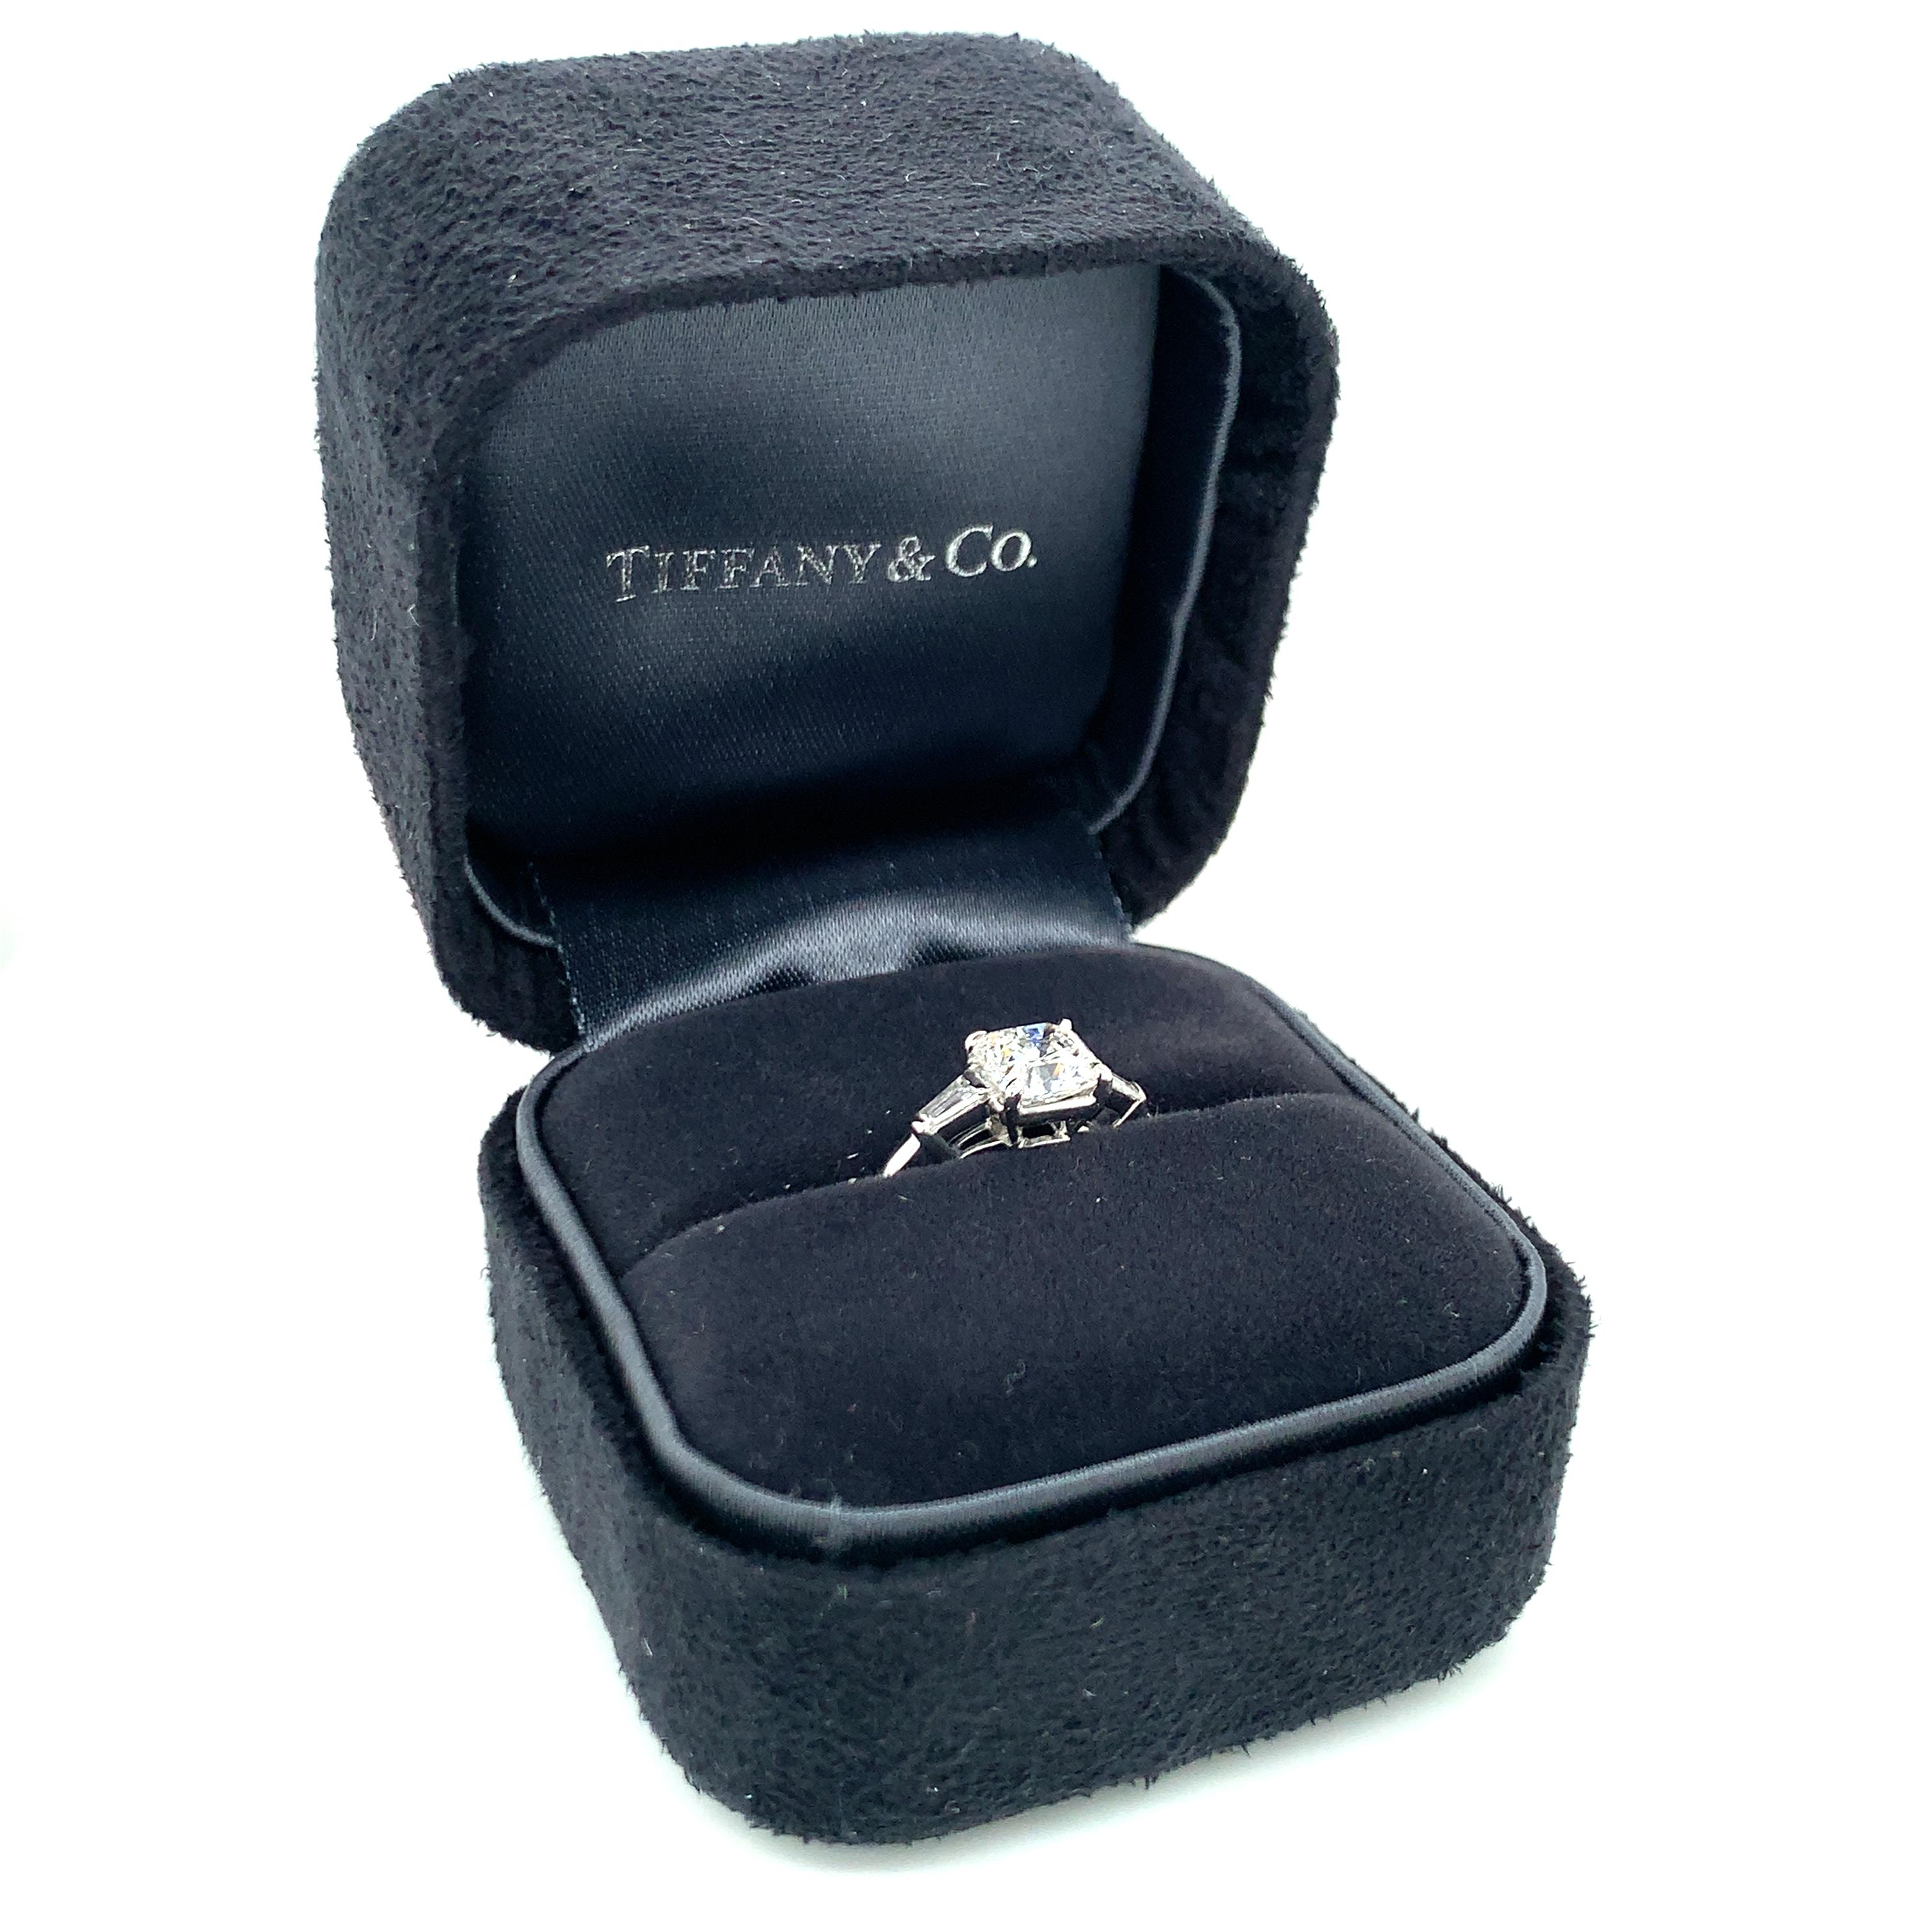 GIA Certified 1.03 Carat Diamond Platinum Engagement Ring by Tiffany & Co. For Sale 1